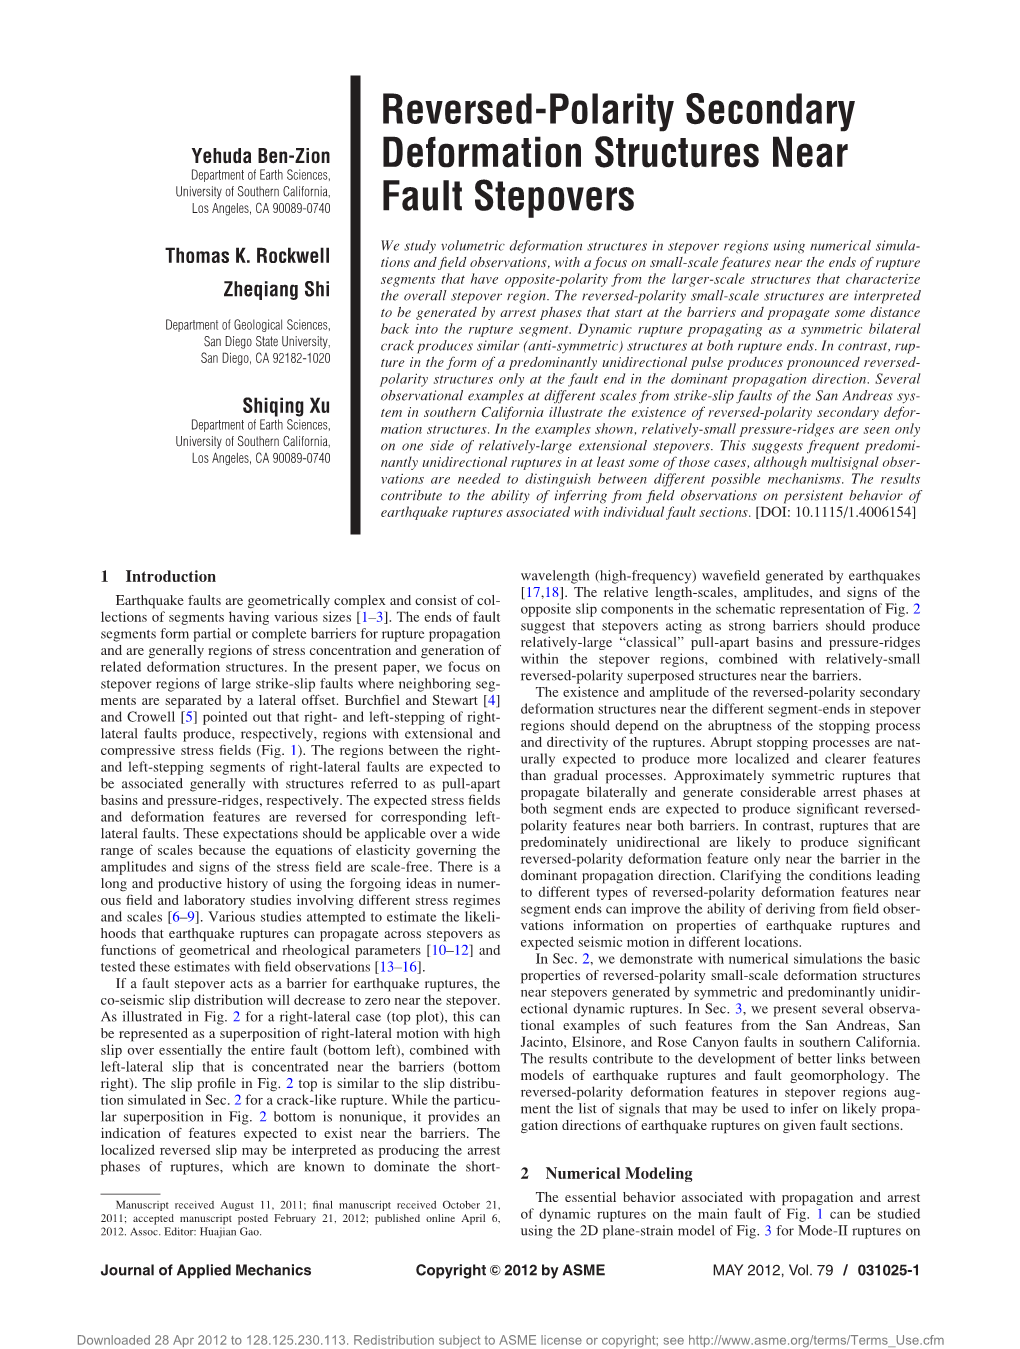 Reversed-Polarity Secondary Deformation Structures Near Fault